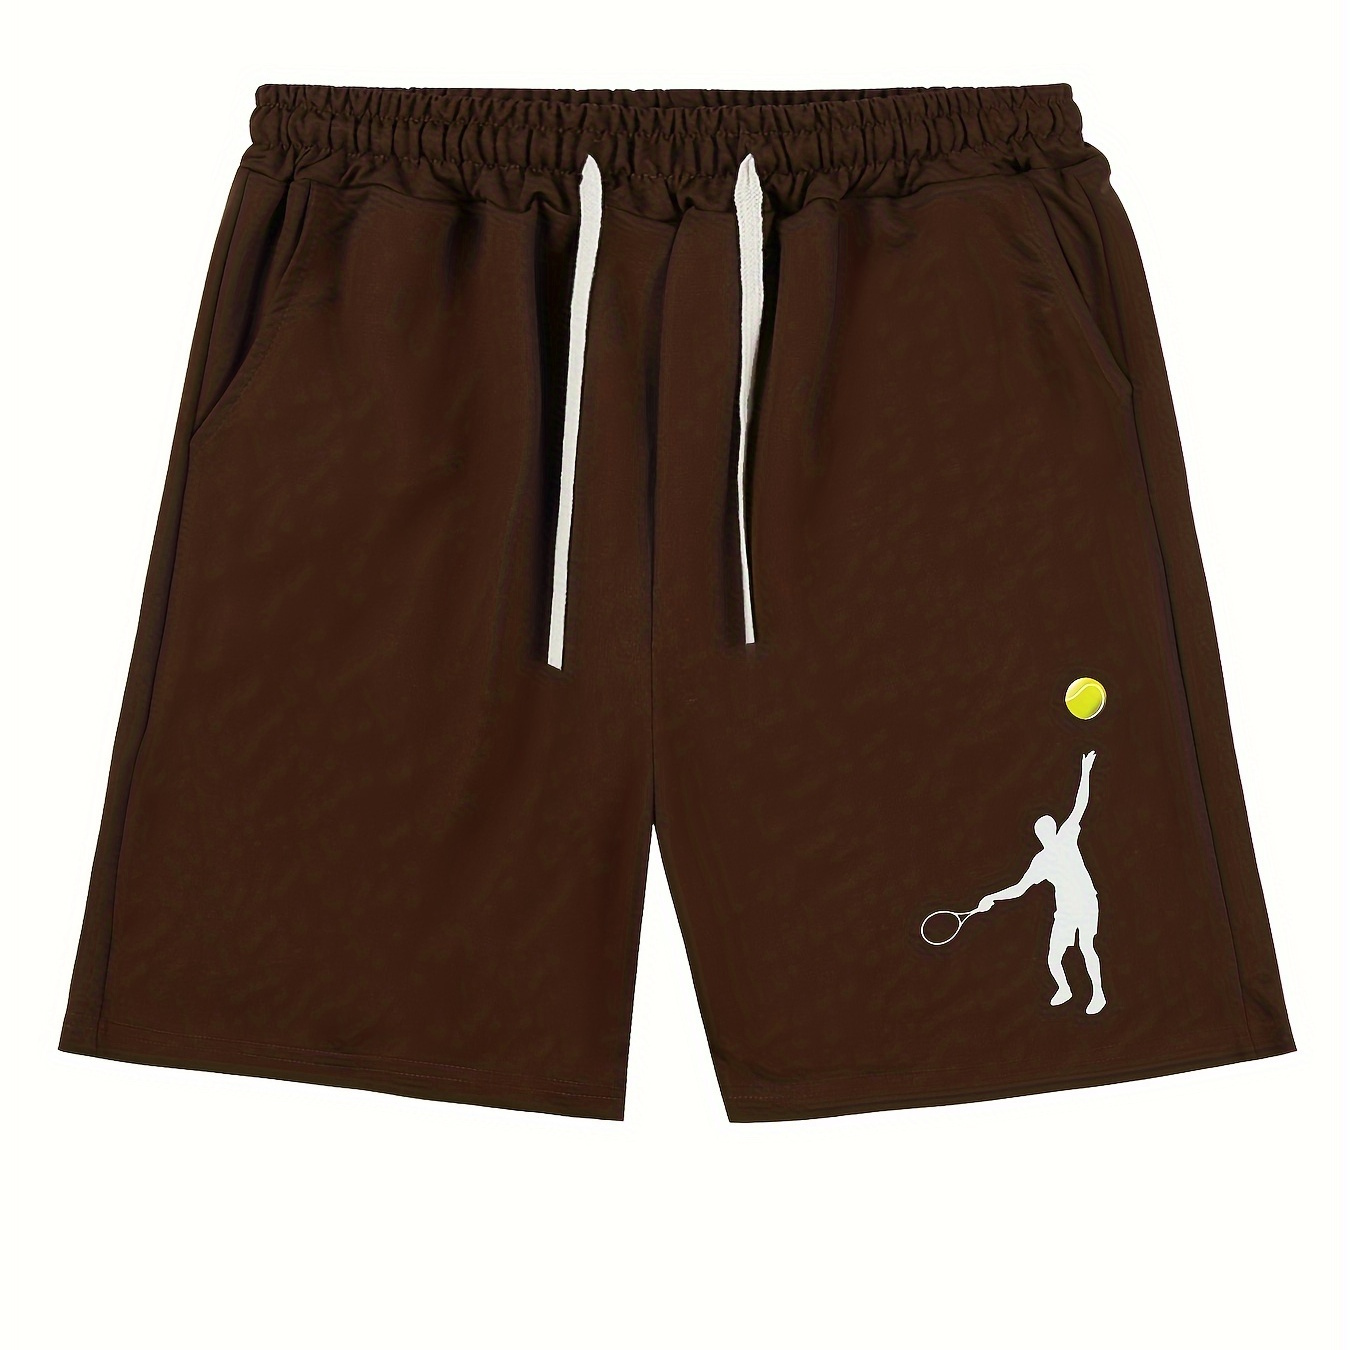 

Men's Casual Tennis Sport Pattern Print Sports Shorts, Summer Fashion Drawstring Shorts For Gym & Outdoor Activities